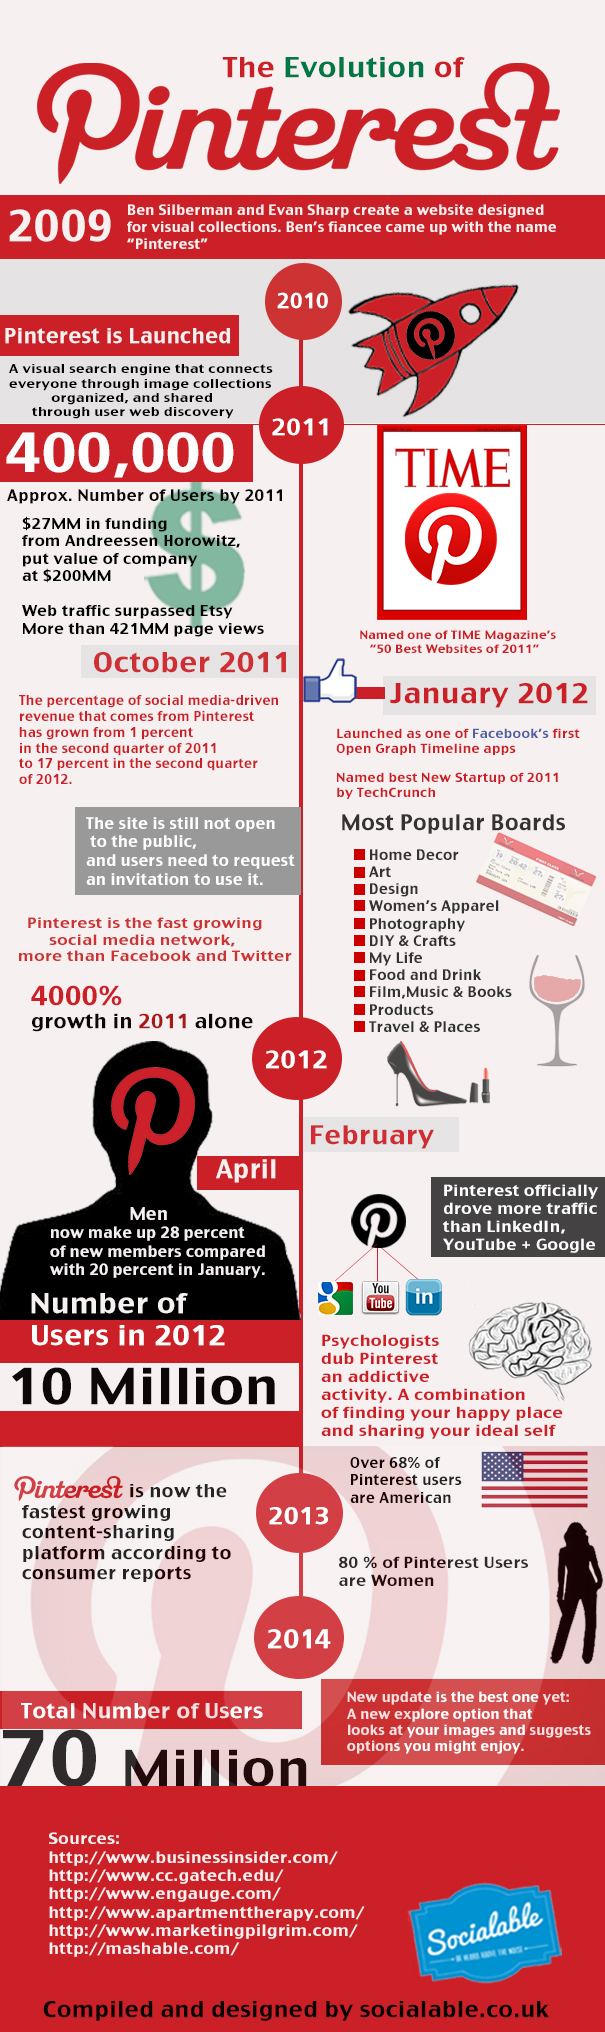 The Evolution of Pinterest Journey from 2009 to 2014